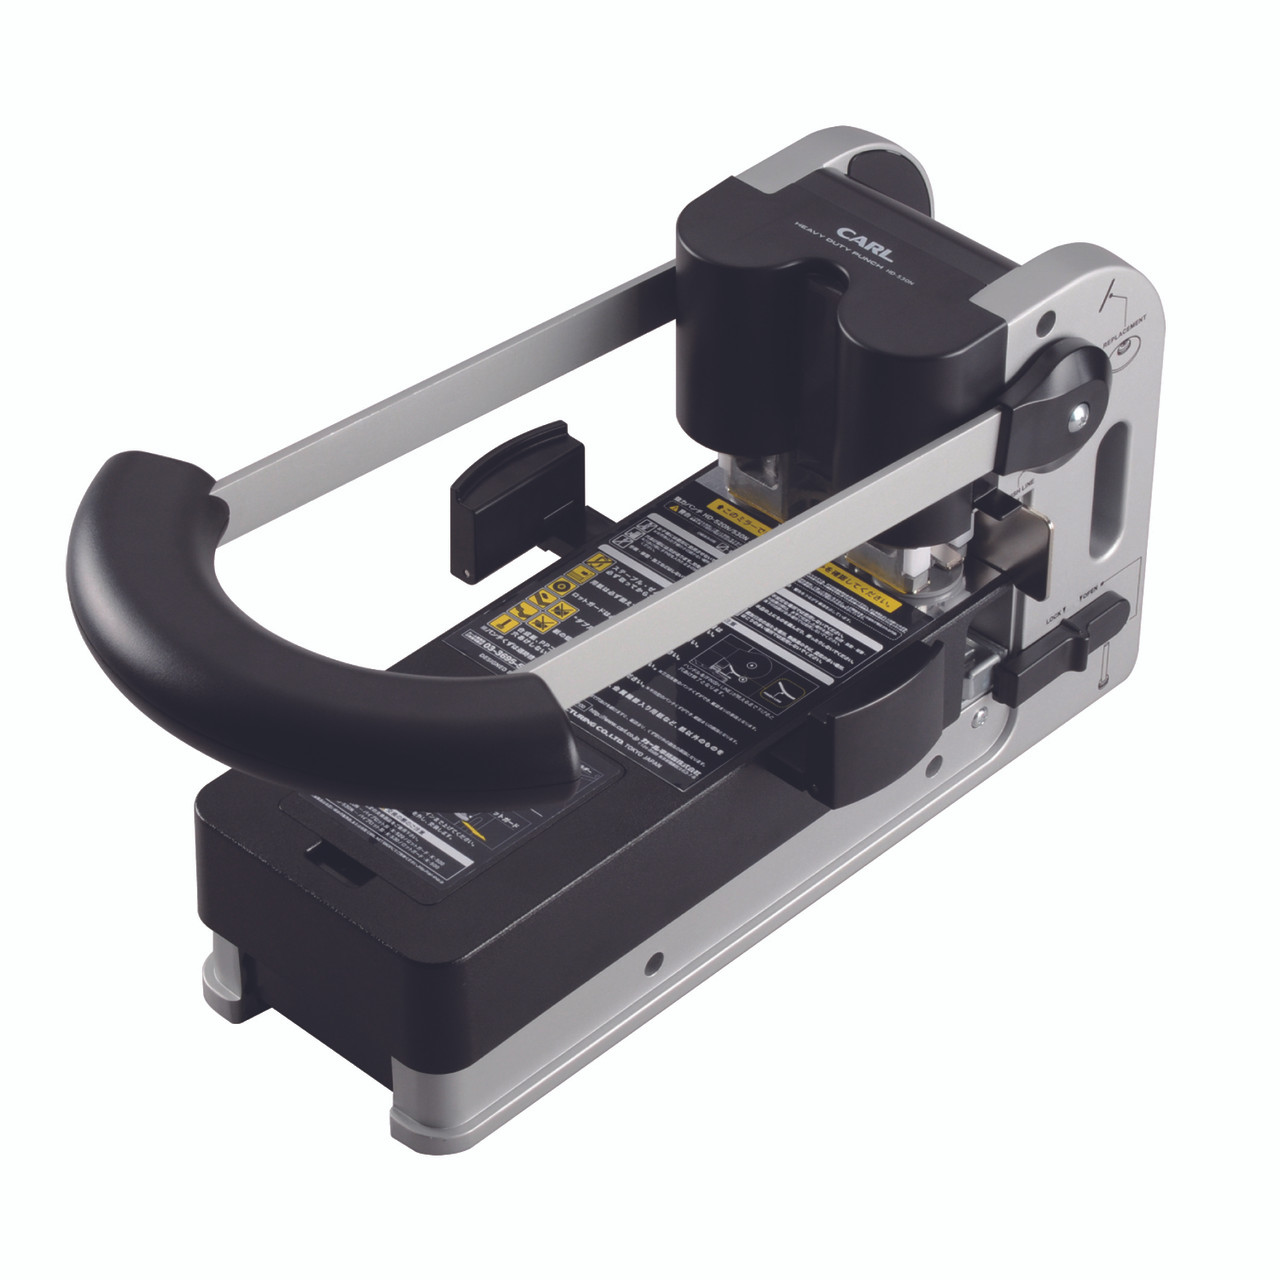 Carl Heavy-Duty 300-Page 2-Hole Punch